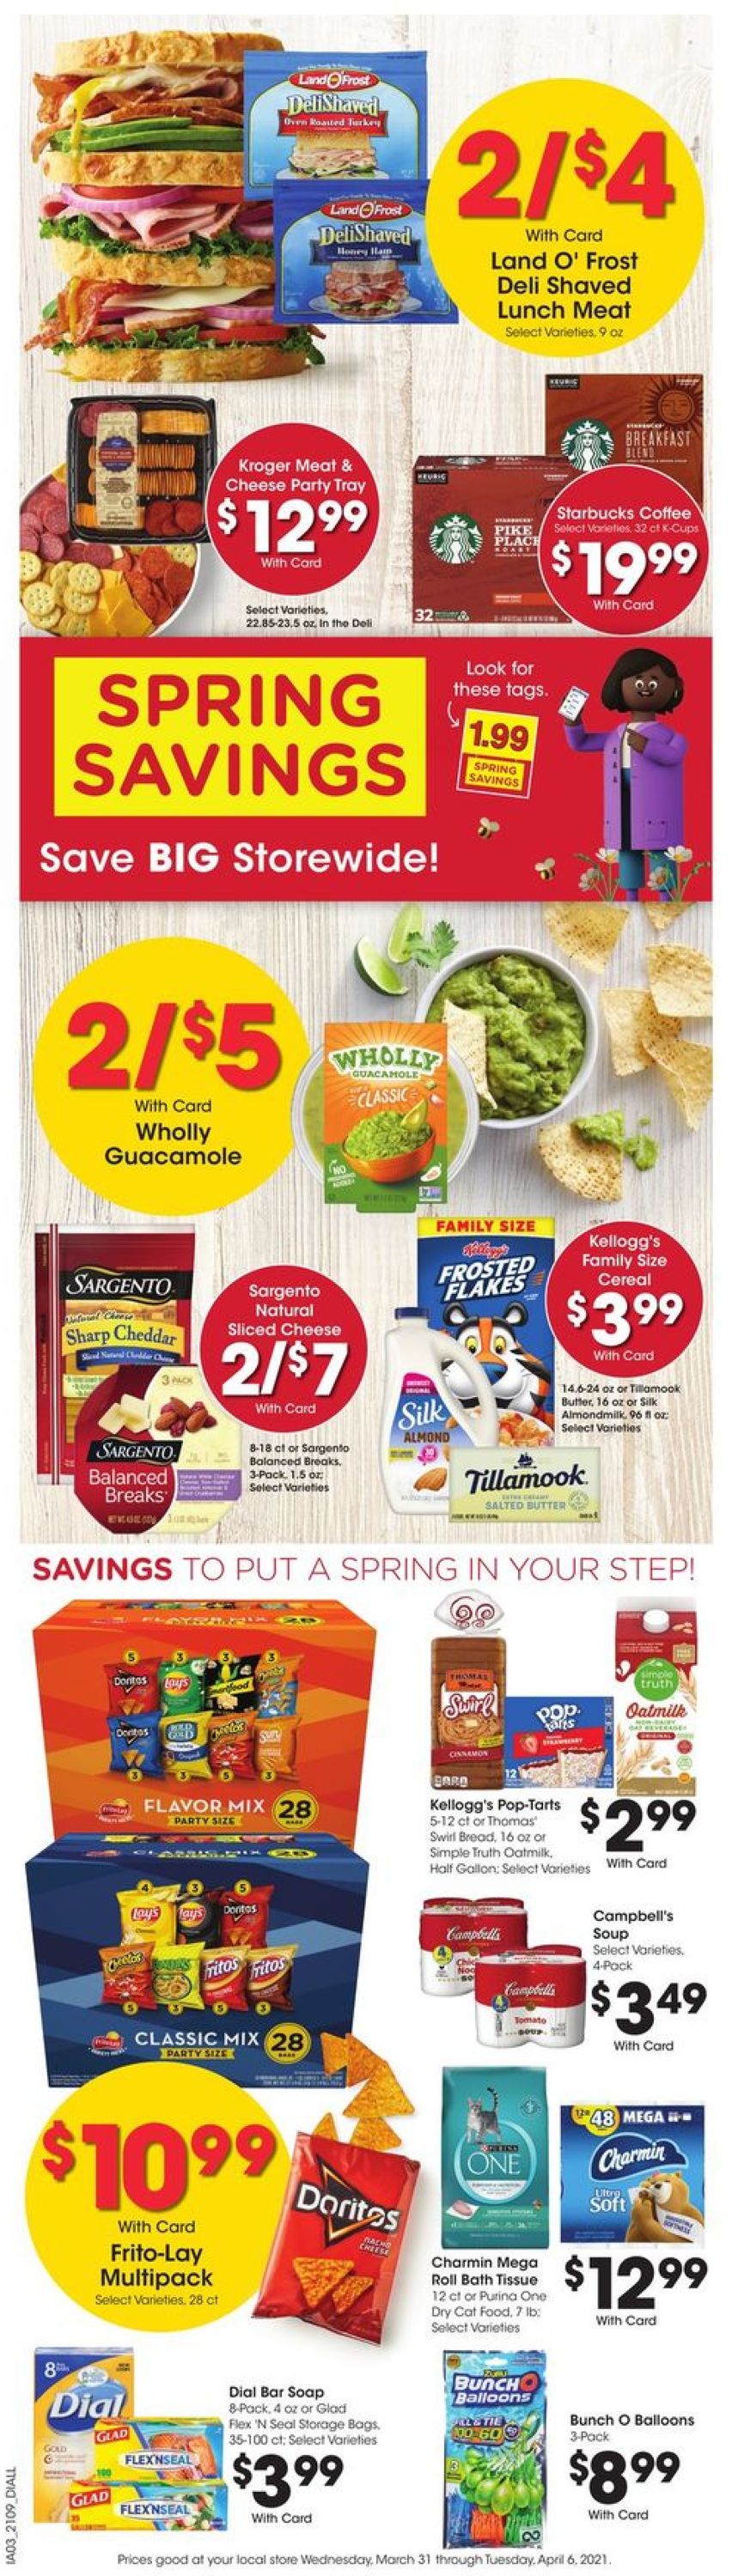 Gerbes Super Markets - Easter 2021 ad Weekly Ad Circular - valid 03/31-04/06/2021 (Page 9)